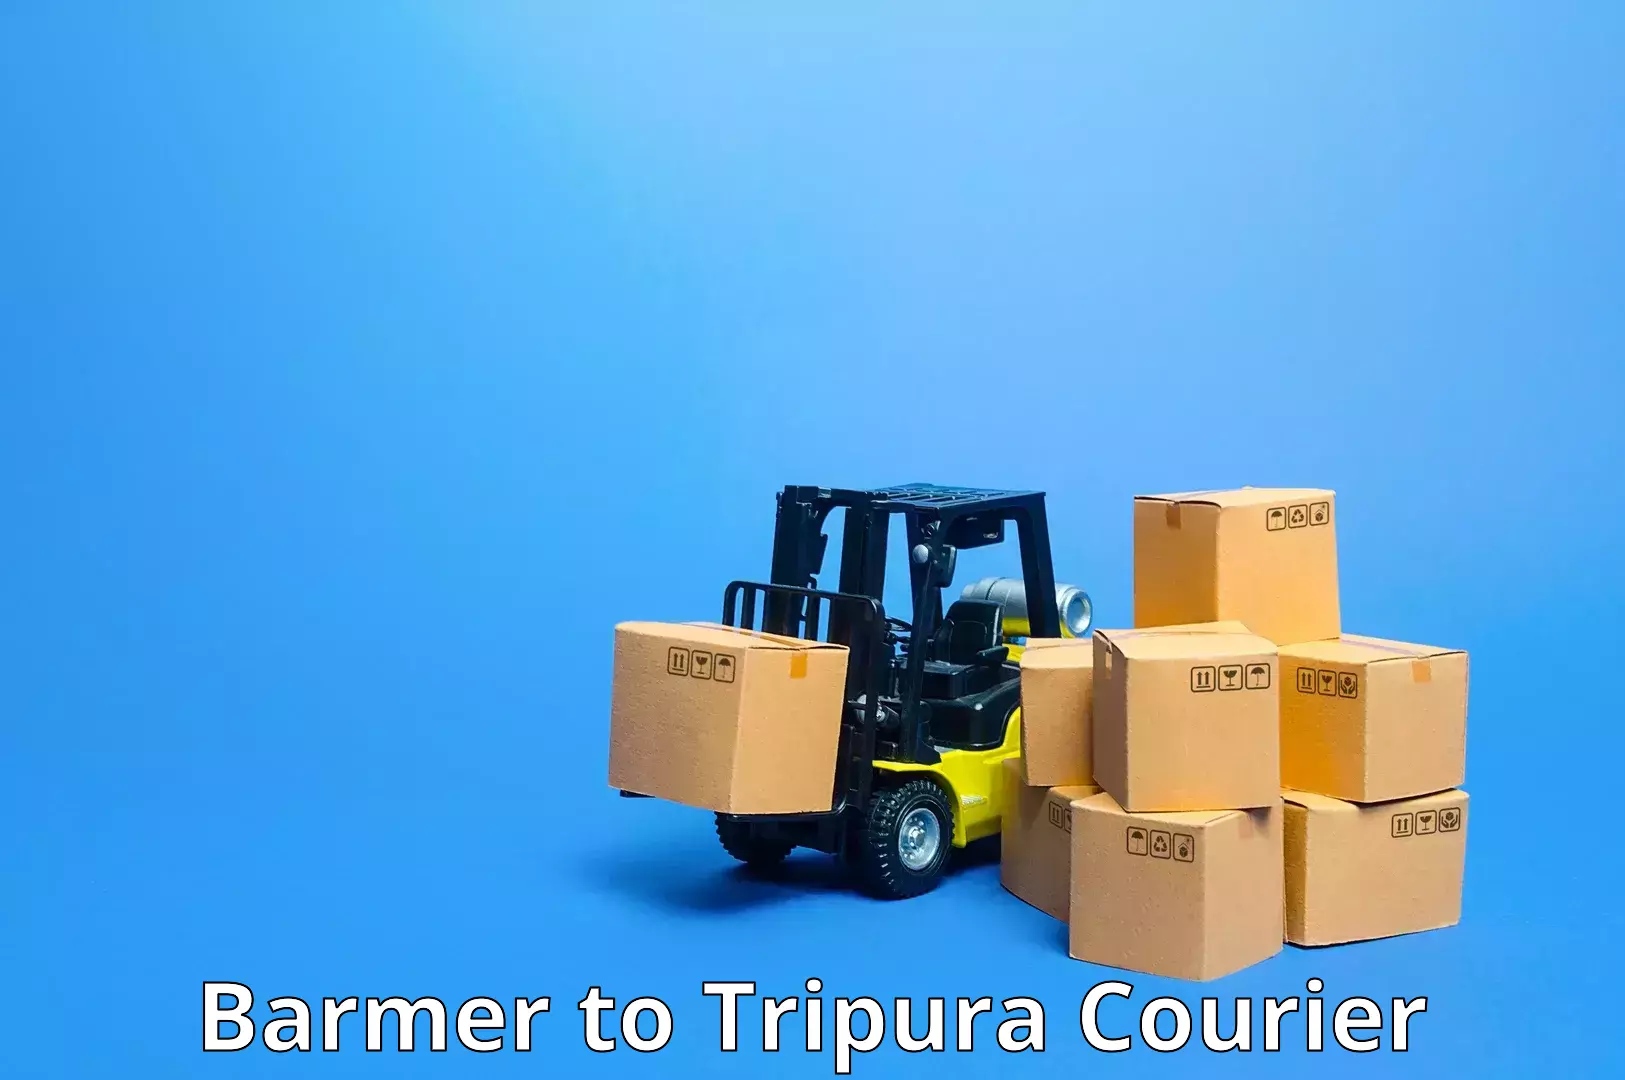 Nationwide shipping services Barmer to Udaipur Tripura